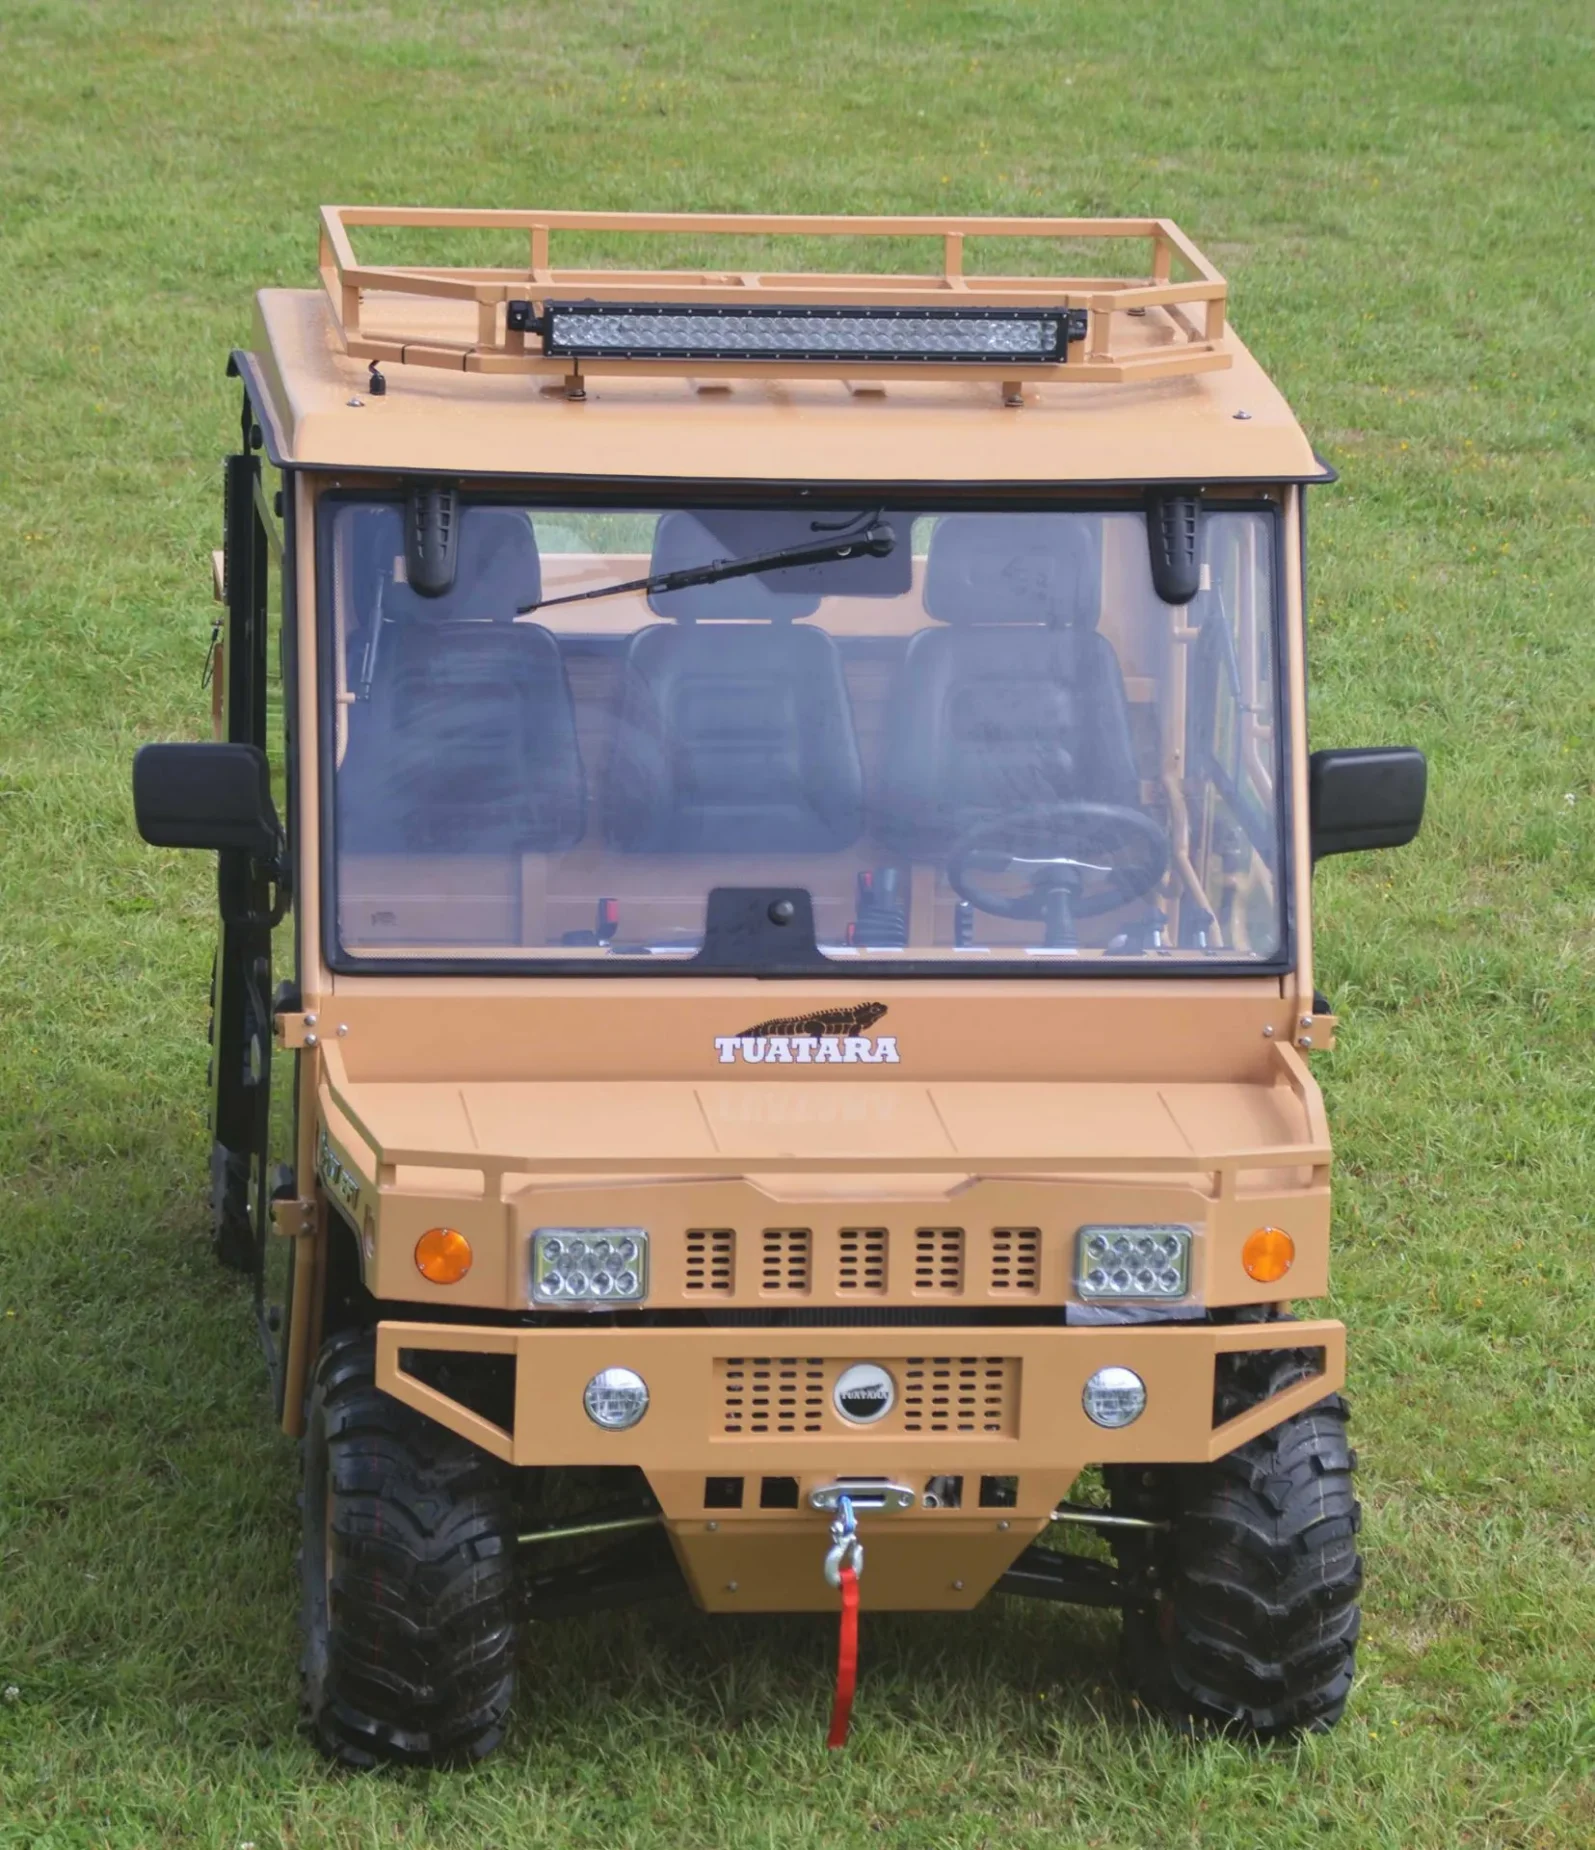 A tan vehicle is parked in the grass.